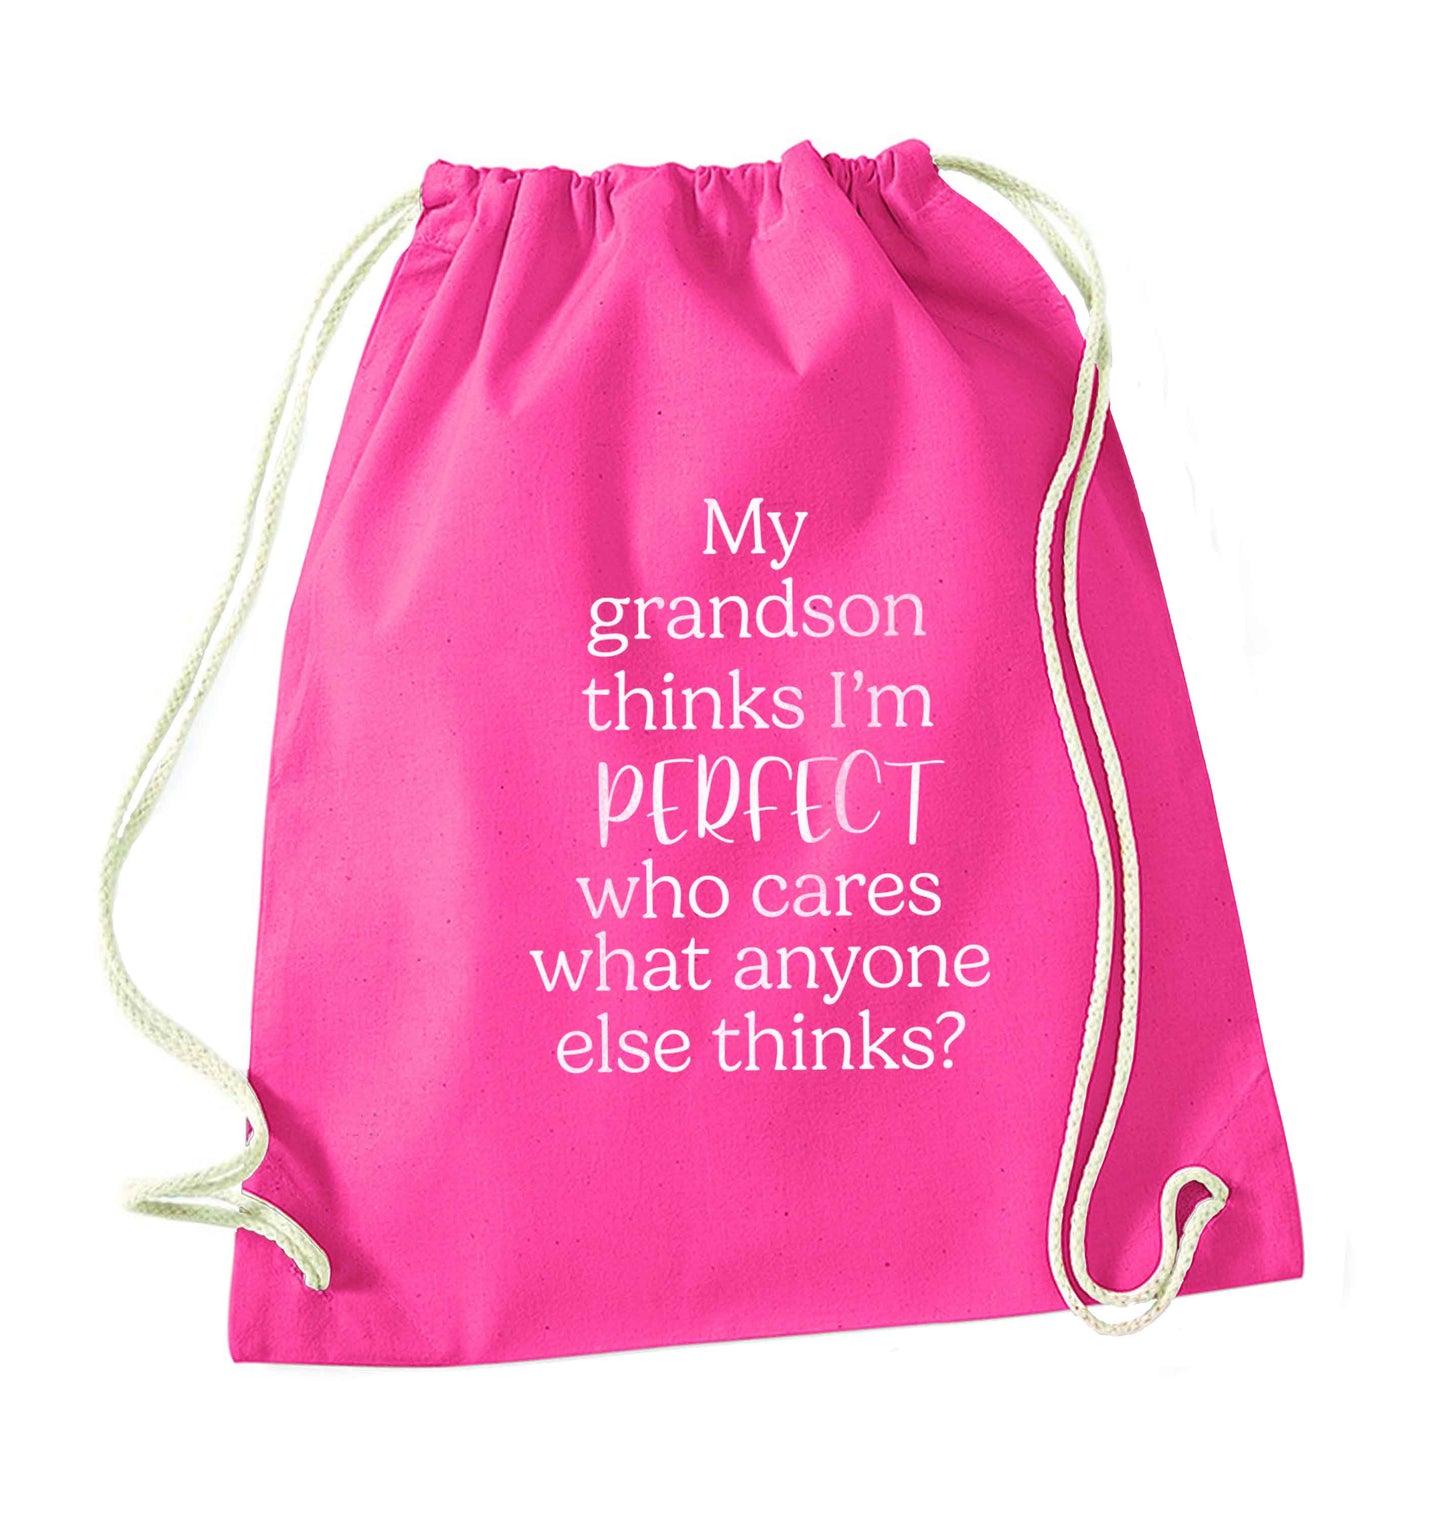 My Grandson thinks I'm perfect who cares what anyone else thinks? pink drawstring bag